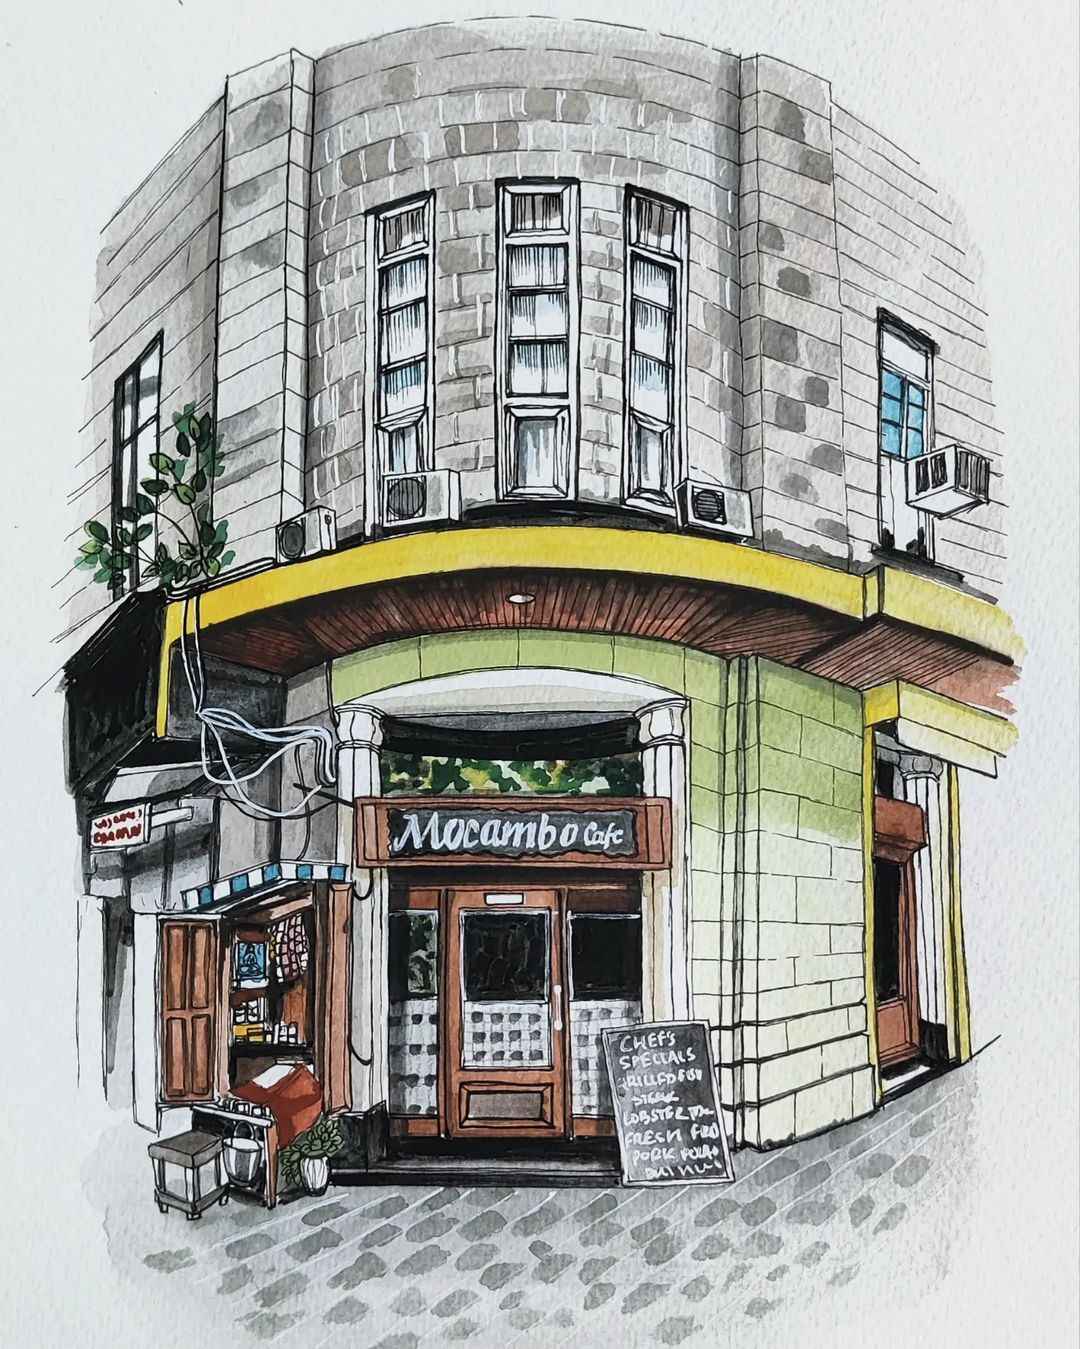 Mocambo Cafe is an Iranian restaurant in Mumbai that serves Parsi food